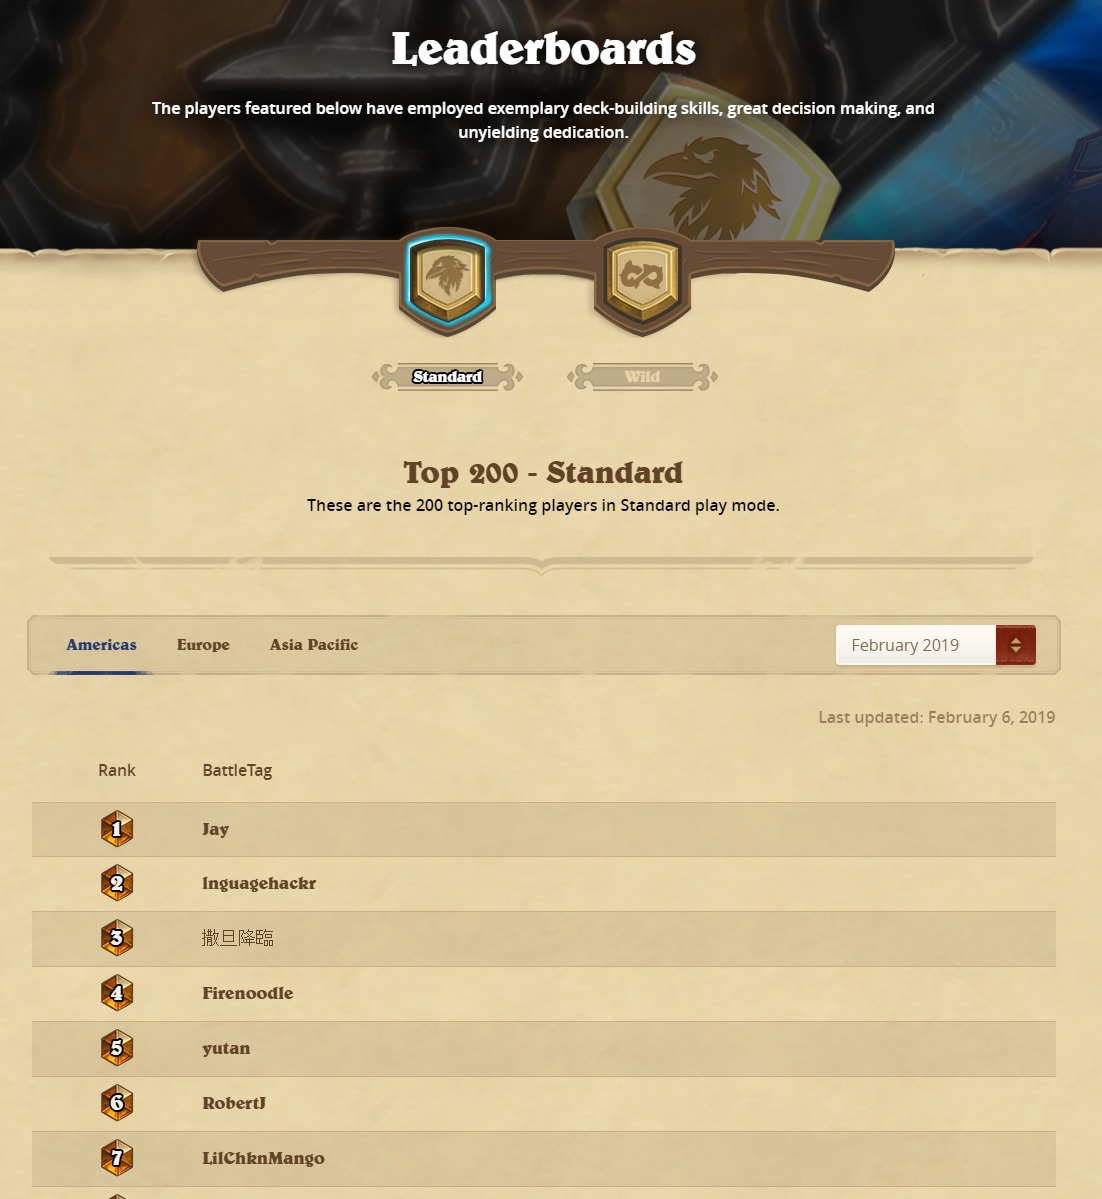 Hearthstone Ranked Ladder Leaderboard Now Live!